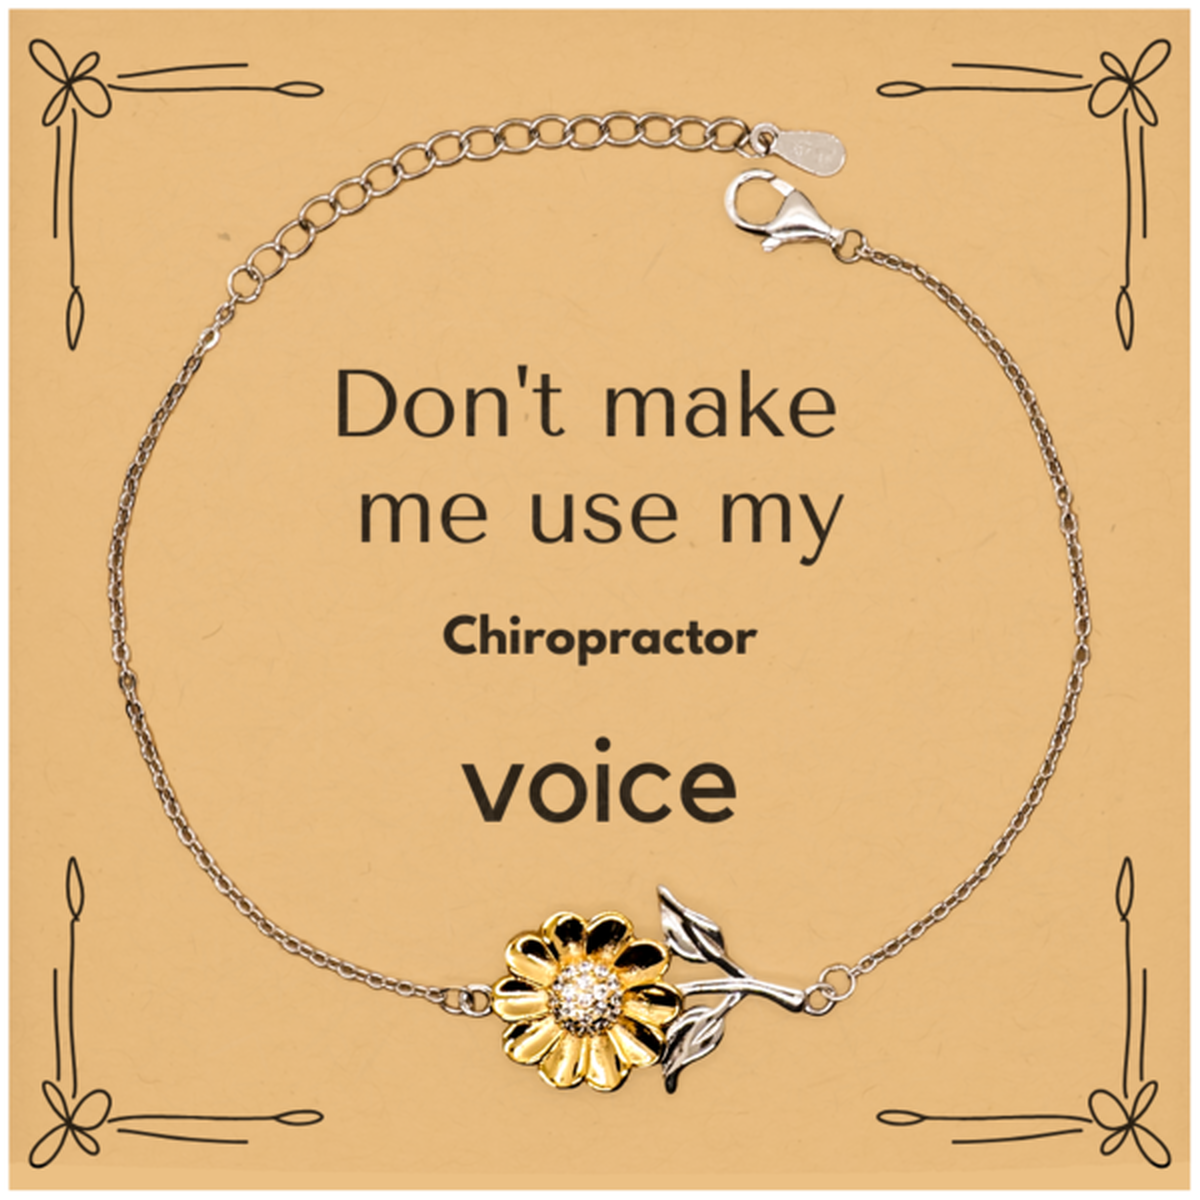 Don't make me use my Chiropractor voice, Sarcasm Chiropractor Card Gifts, Christmas Chiropractor Sunflower Bracelet Birthday Unique Gifts For Chiropractor Coworkers, Men, Women, Colleague, Friends